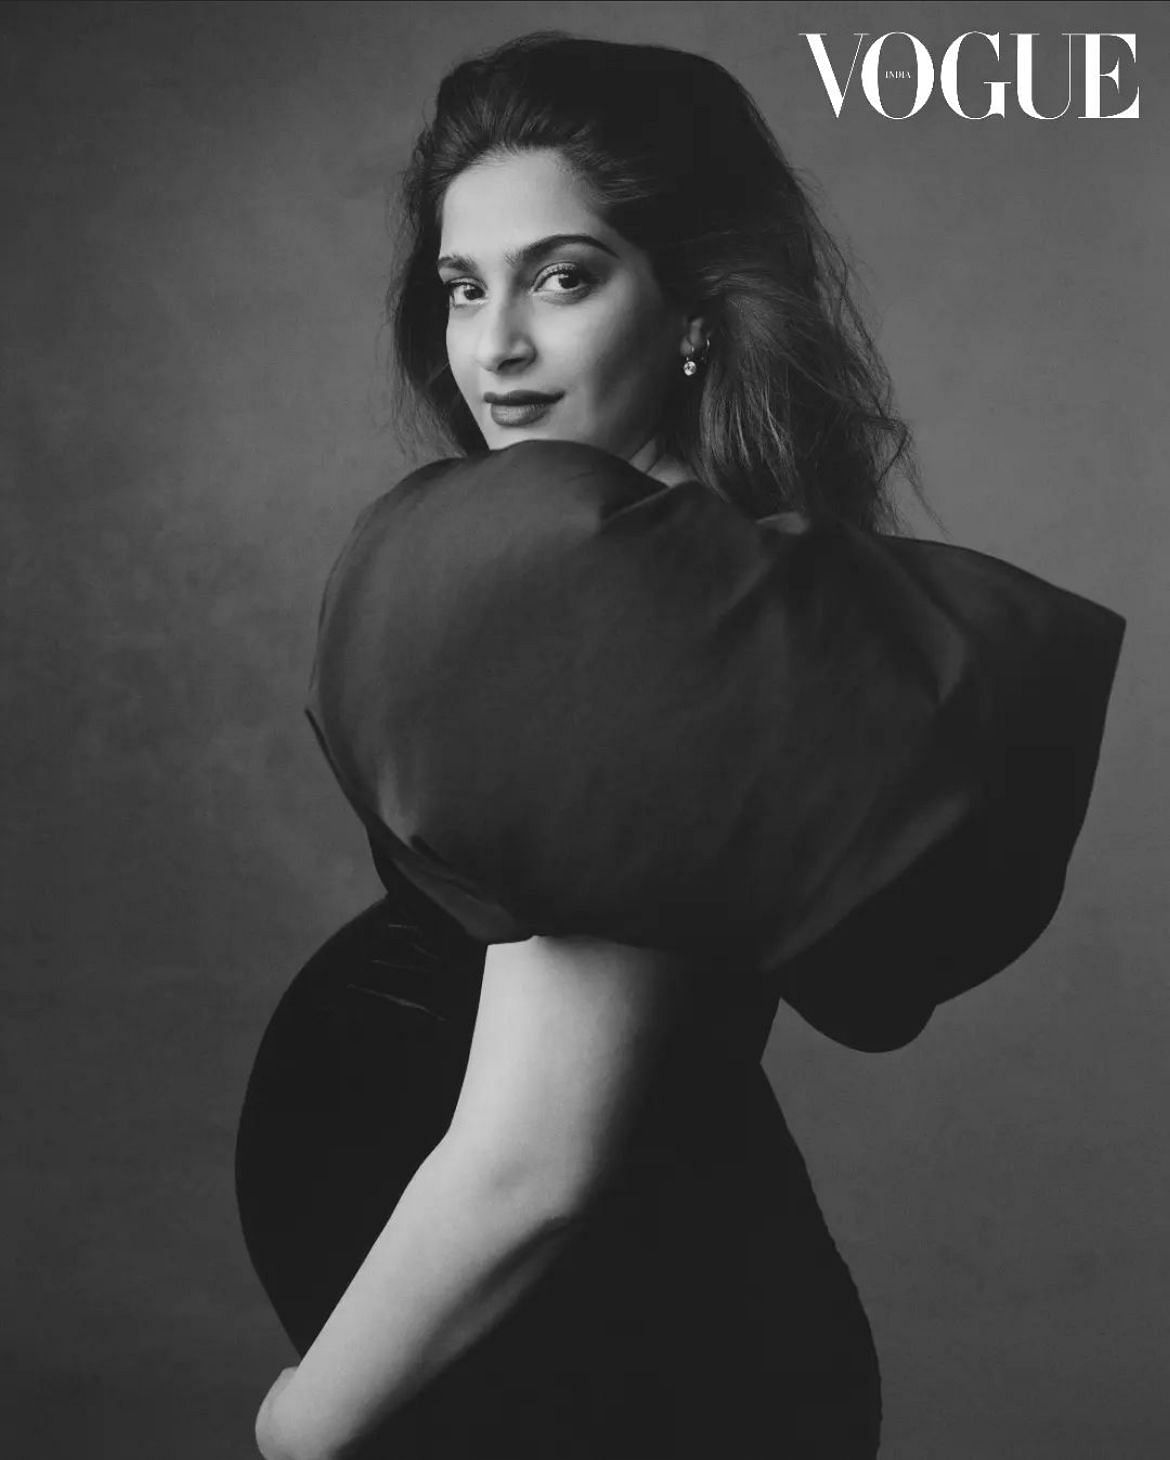 Sonam Kapoor reflects on her pregnancy, difficult first trimester, and taking time off after childbirth.